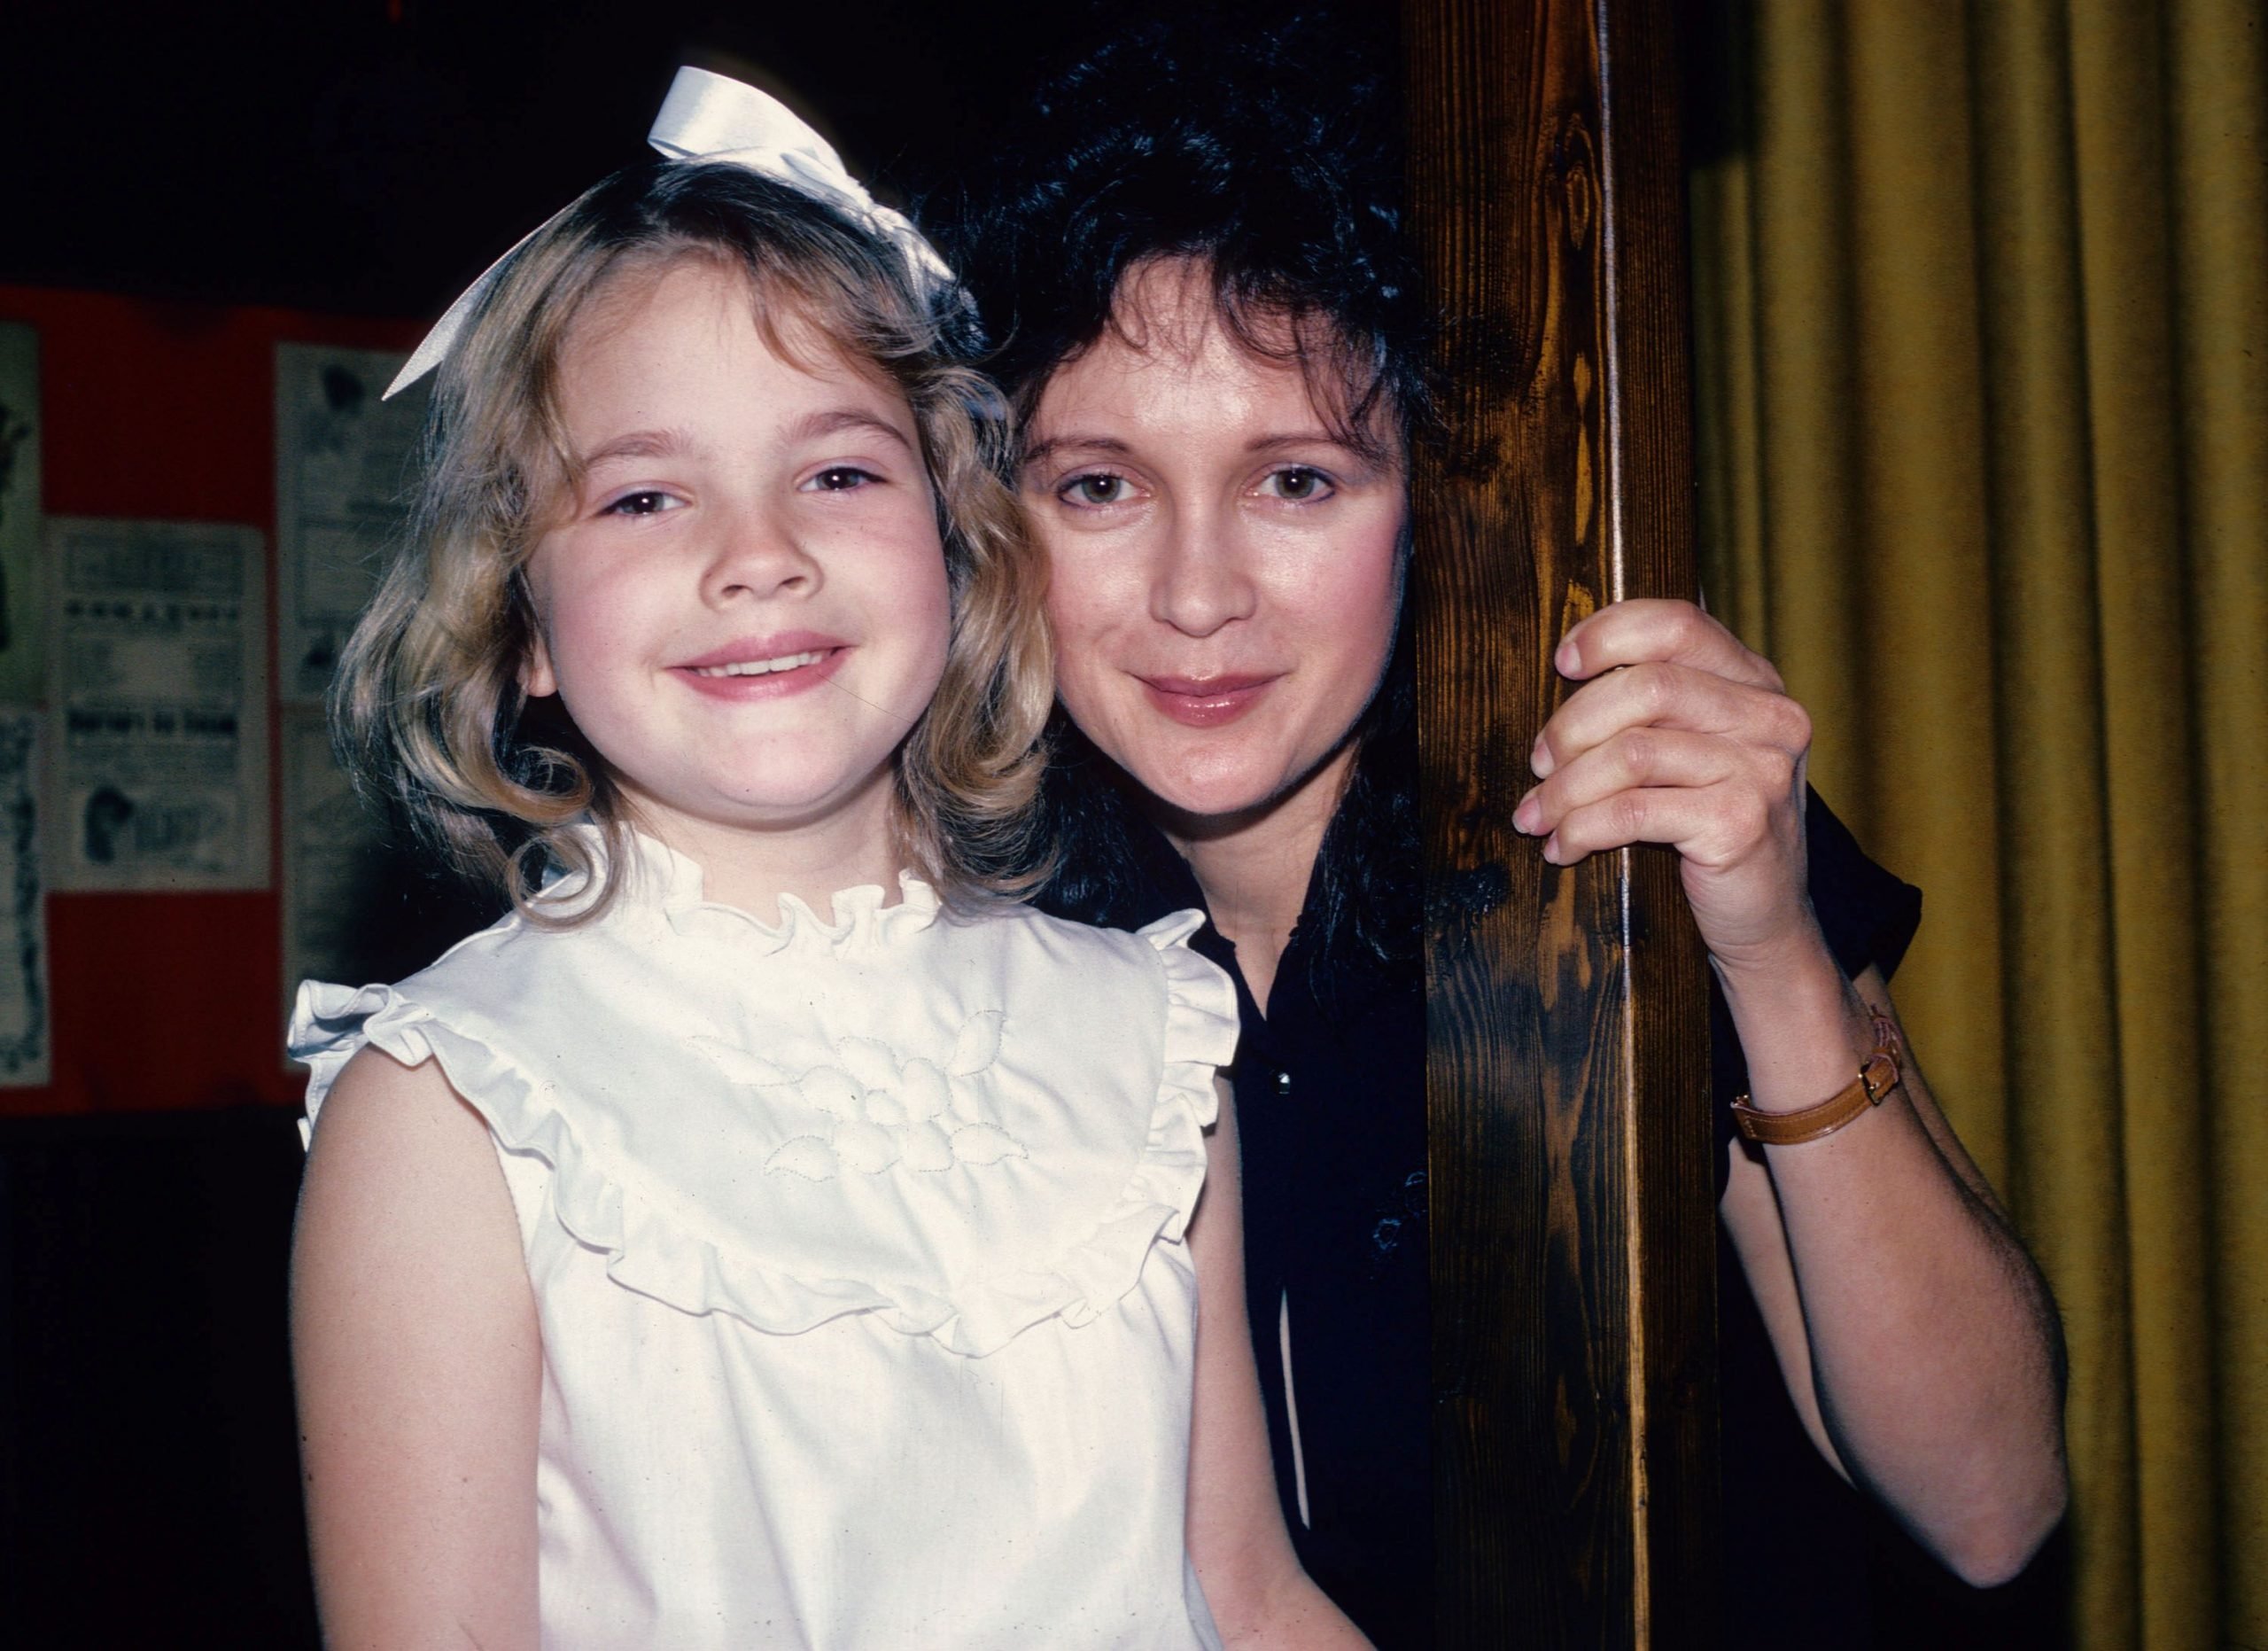 Drew Barrymore, in white, poses for a photograph June 8, 1982 with her mother Jaid Barrymore, in black